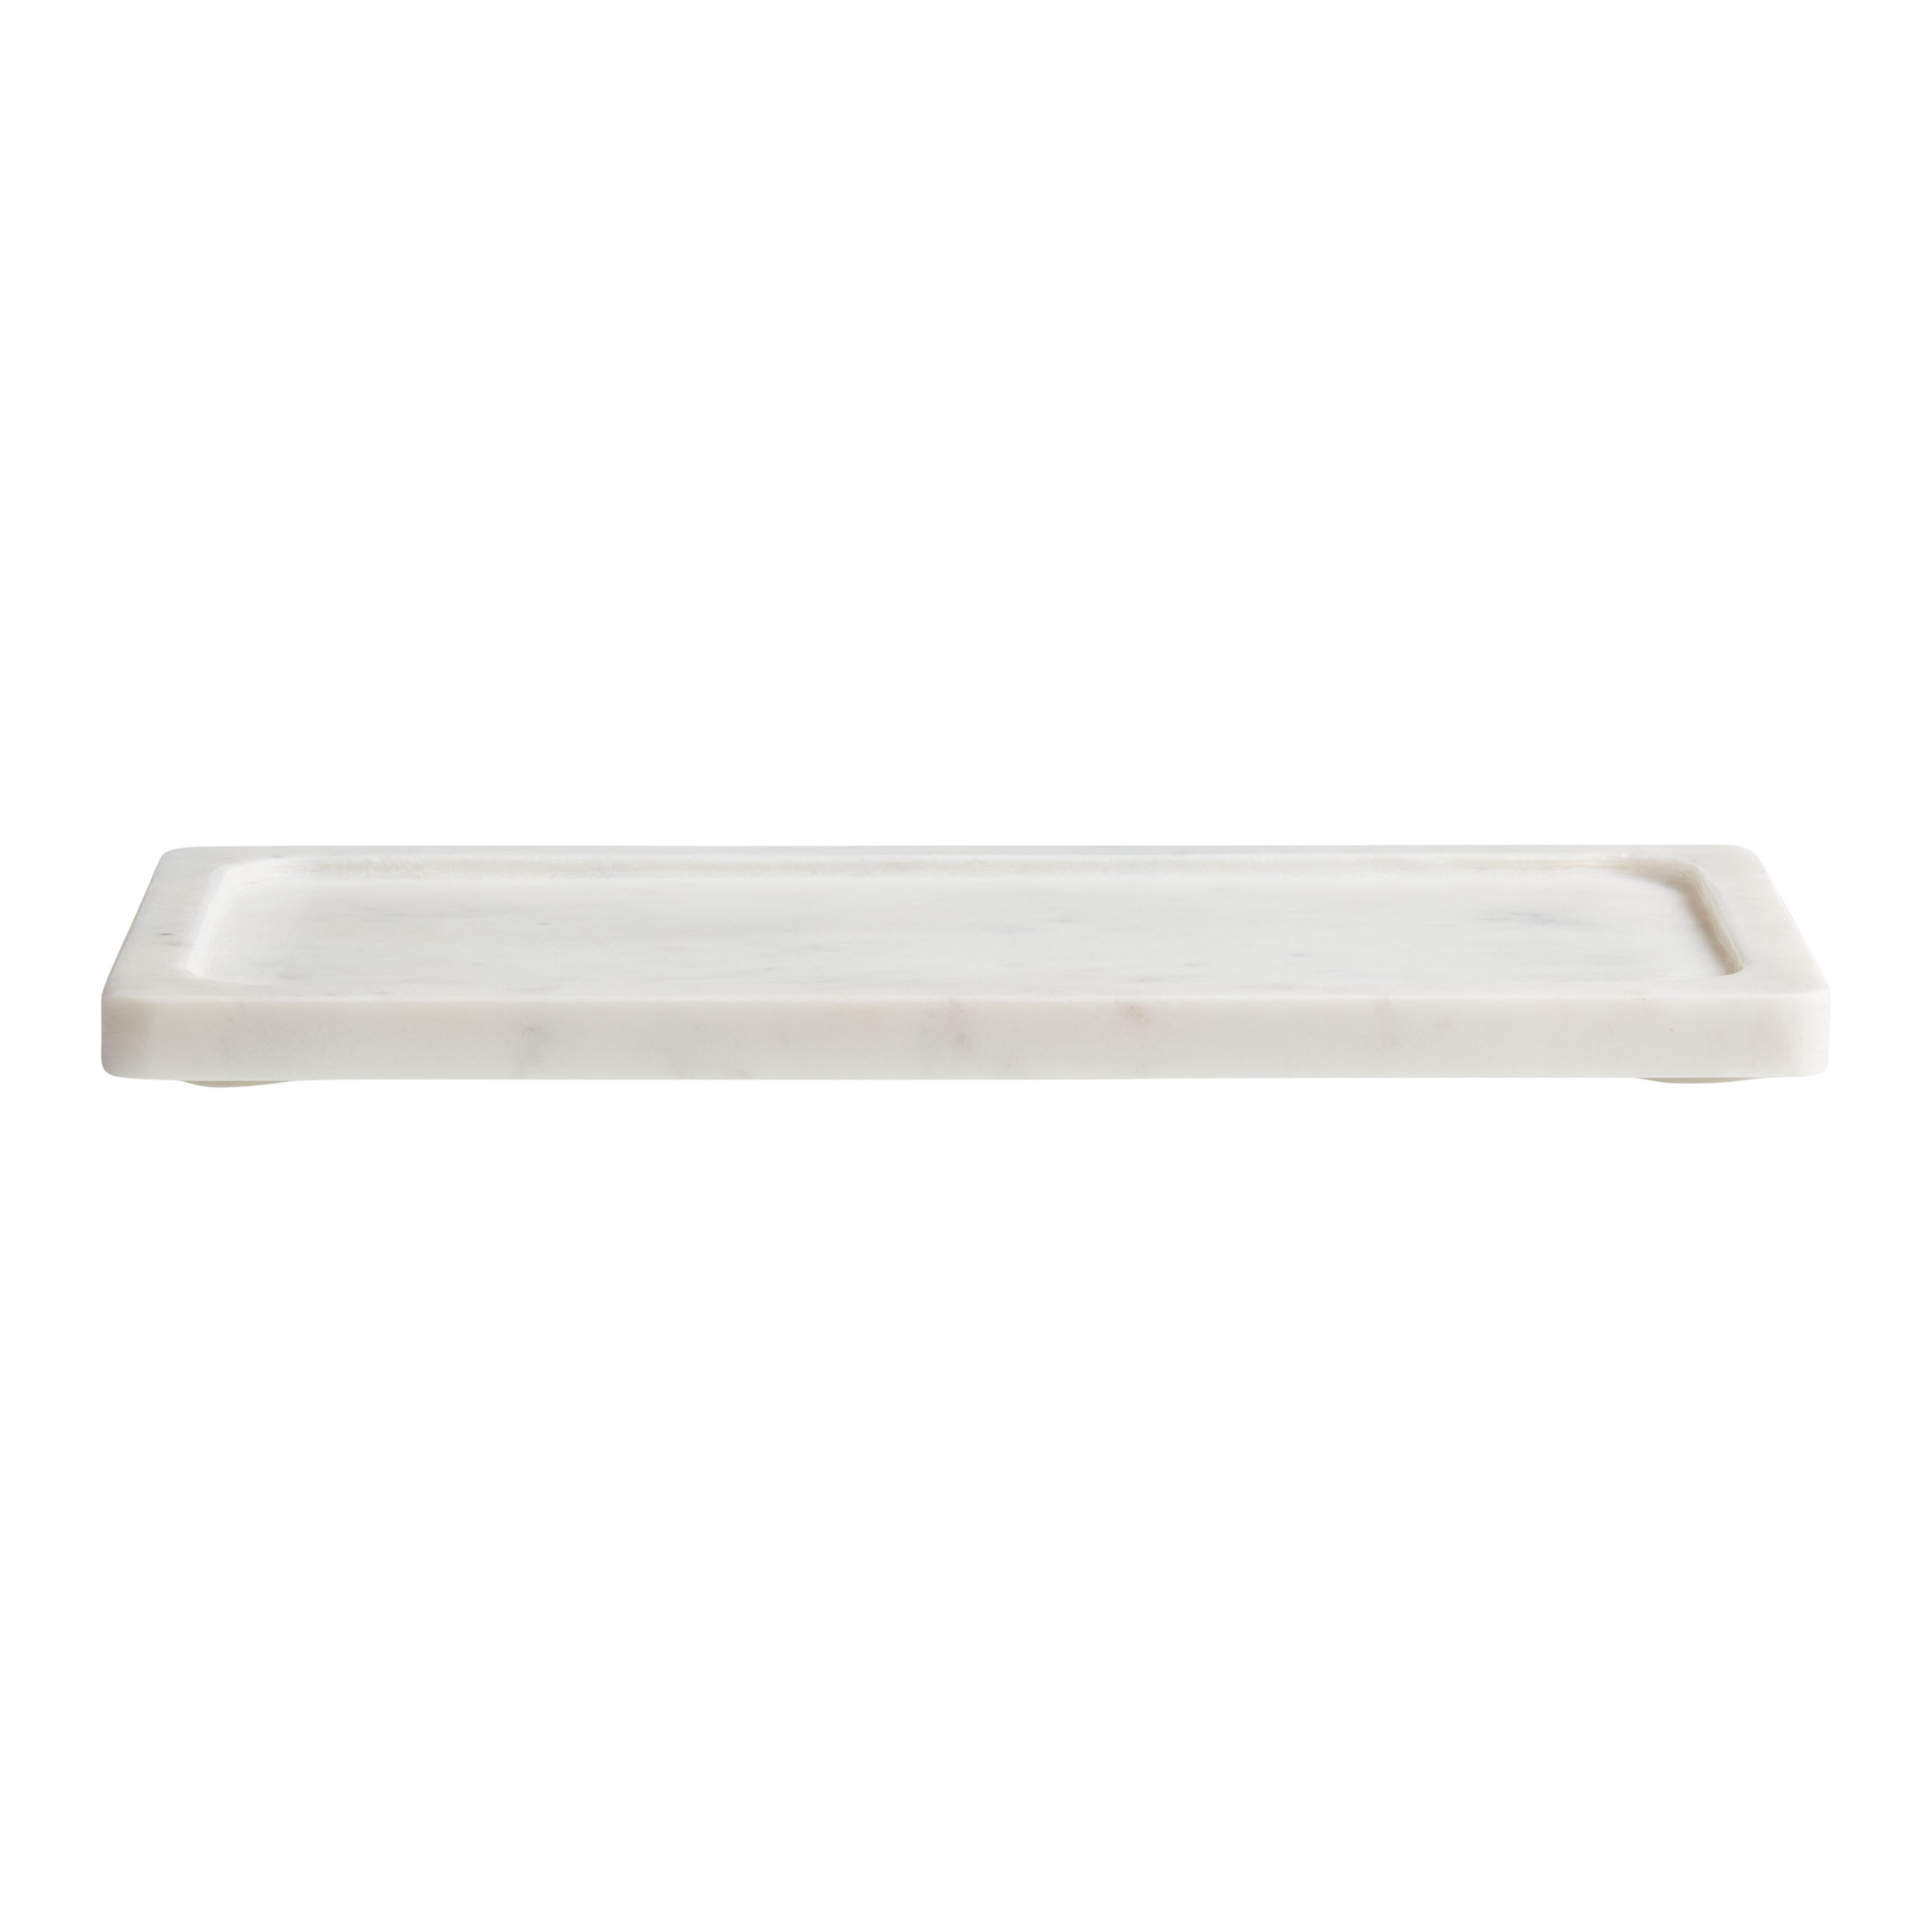 French Kitchen White Marble Spice Rack + Reviews